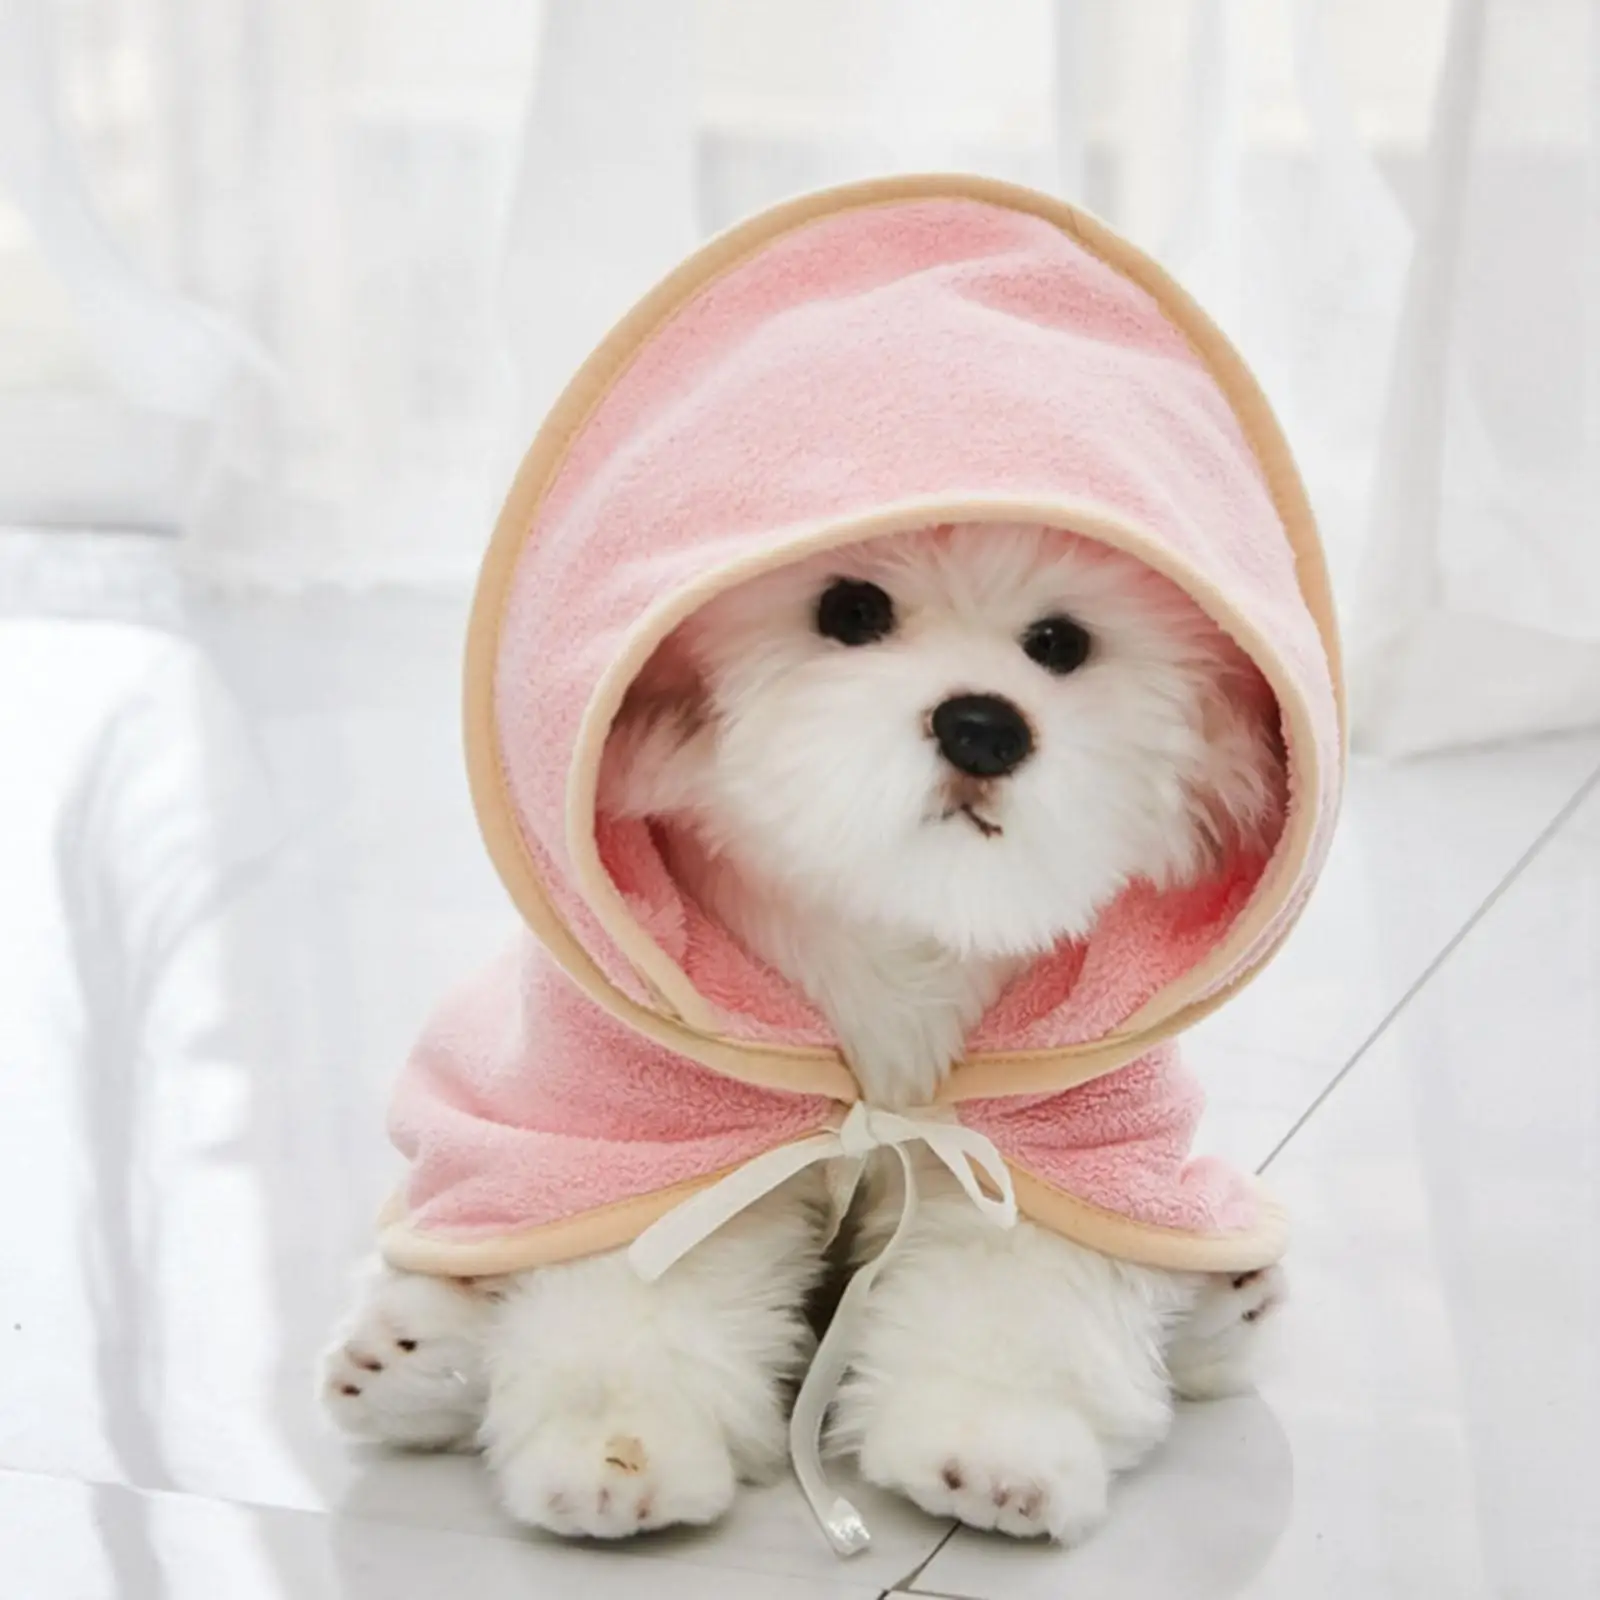 Soft Dog Bathrobe, Drying Towel, Bath Robe Clothes, Super Absorbent Hoodies for Grooming